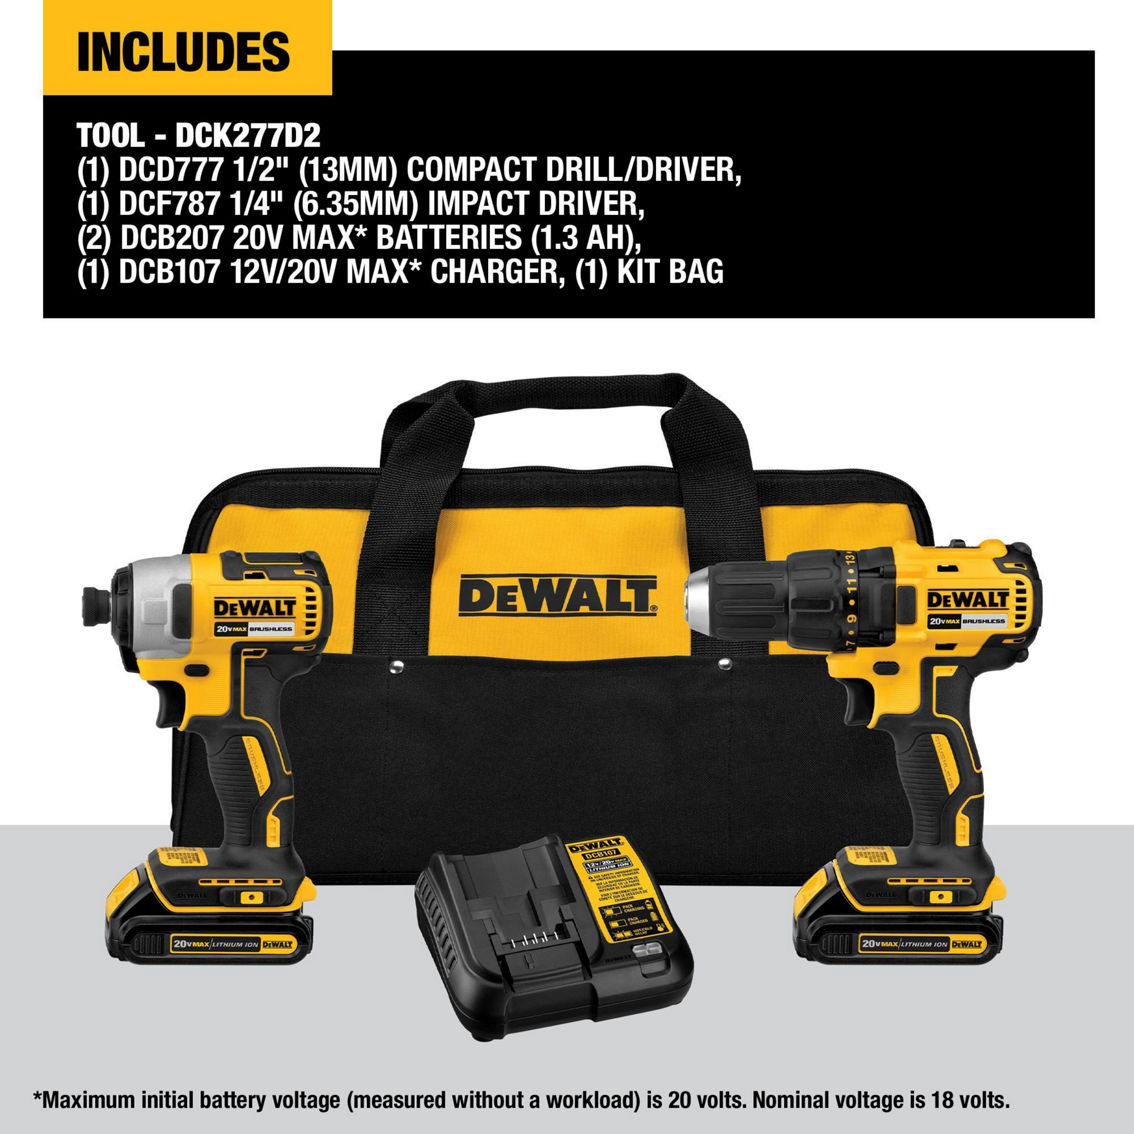 DeWalt 20V MAX 1.5 Ah Lithium Ion Compact Brushless Drill and Impact Driver Kit - Image 2 of 4